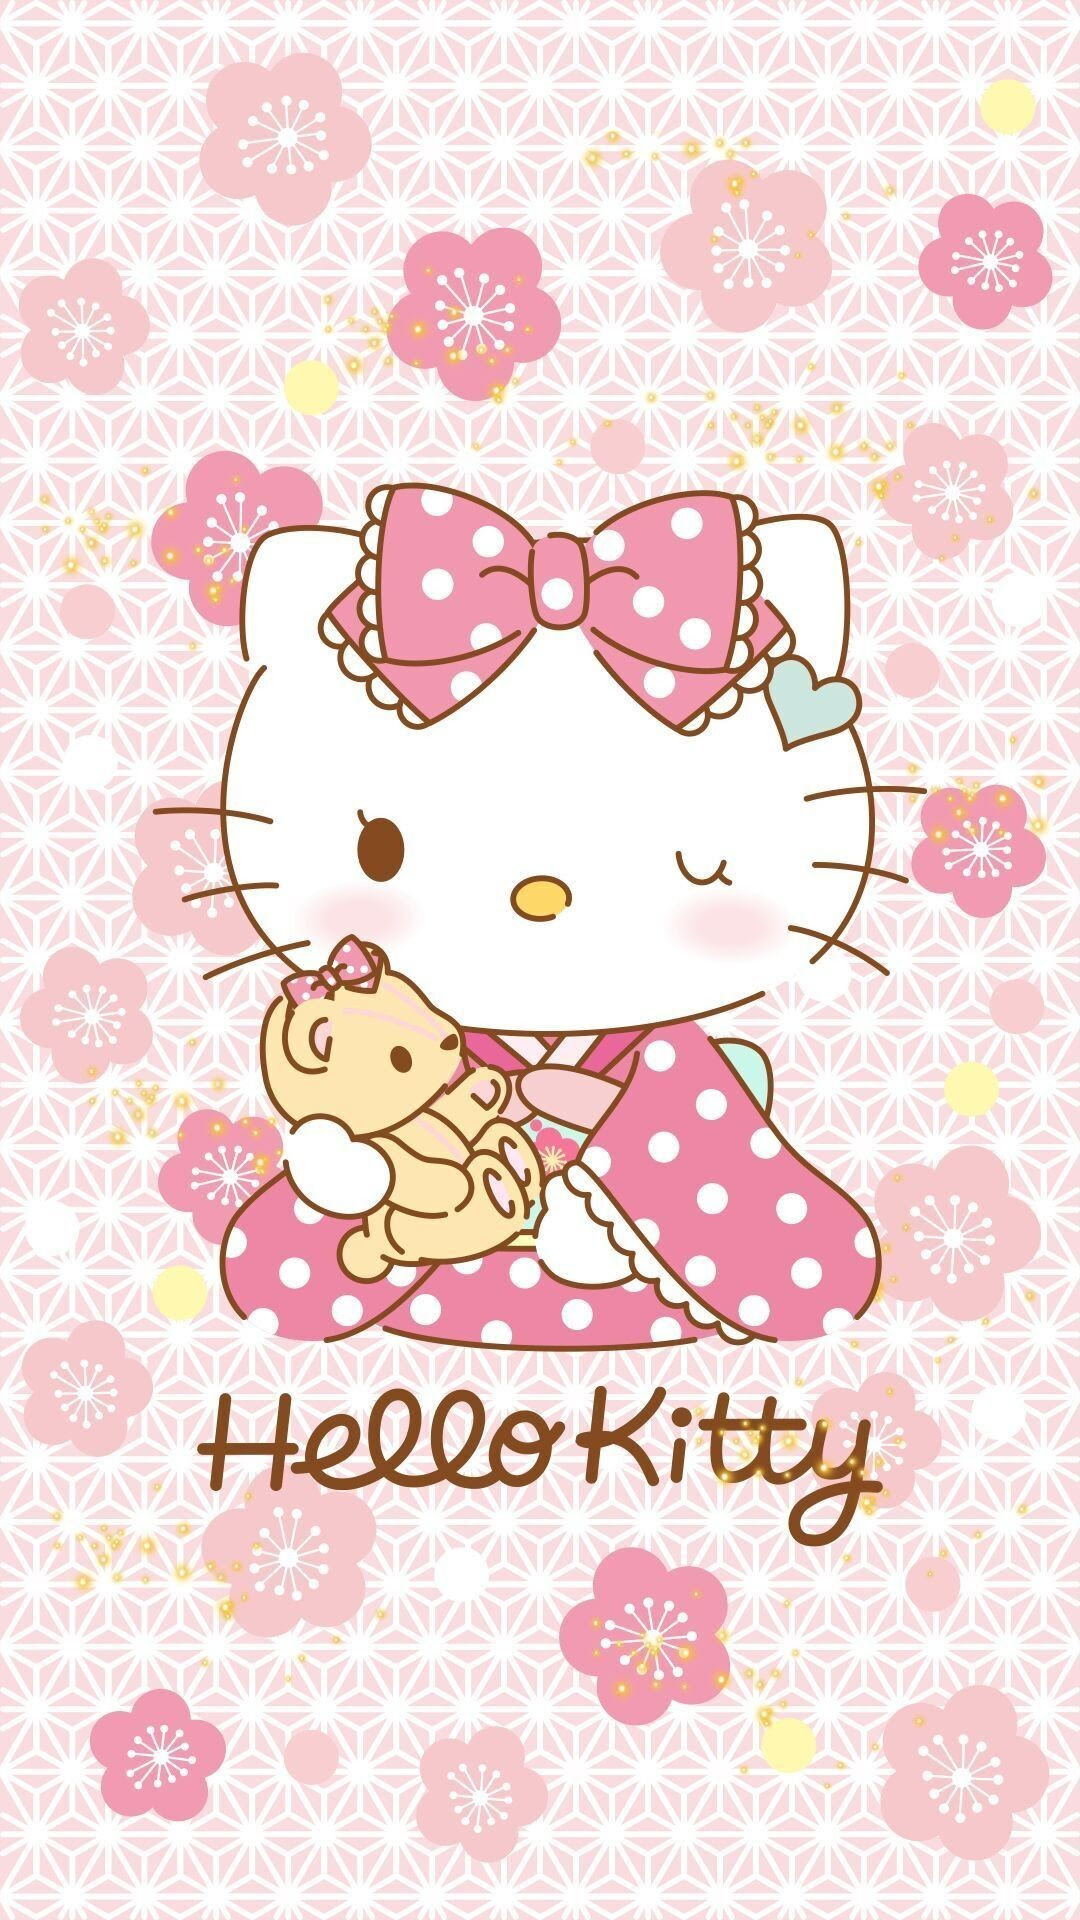 Download Wallpaper Hello Kitty 3d Image Num 89